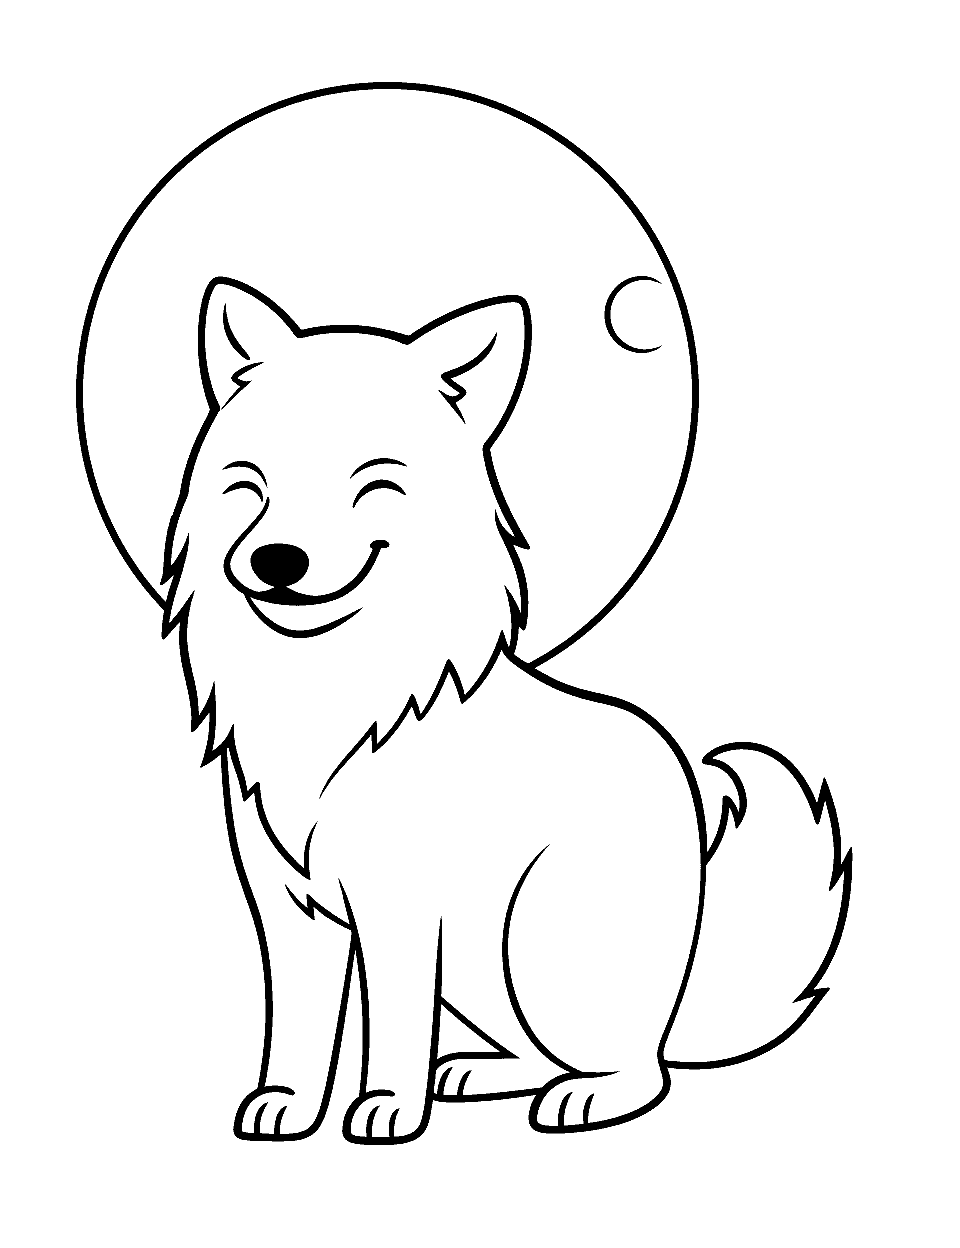 Kawaii Wolf and Moon Coloring Page - An adorable kawaii, tiny wolf with a moon in the background.